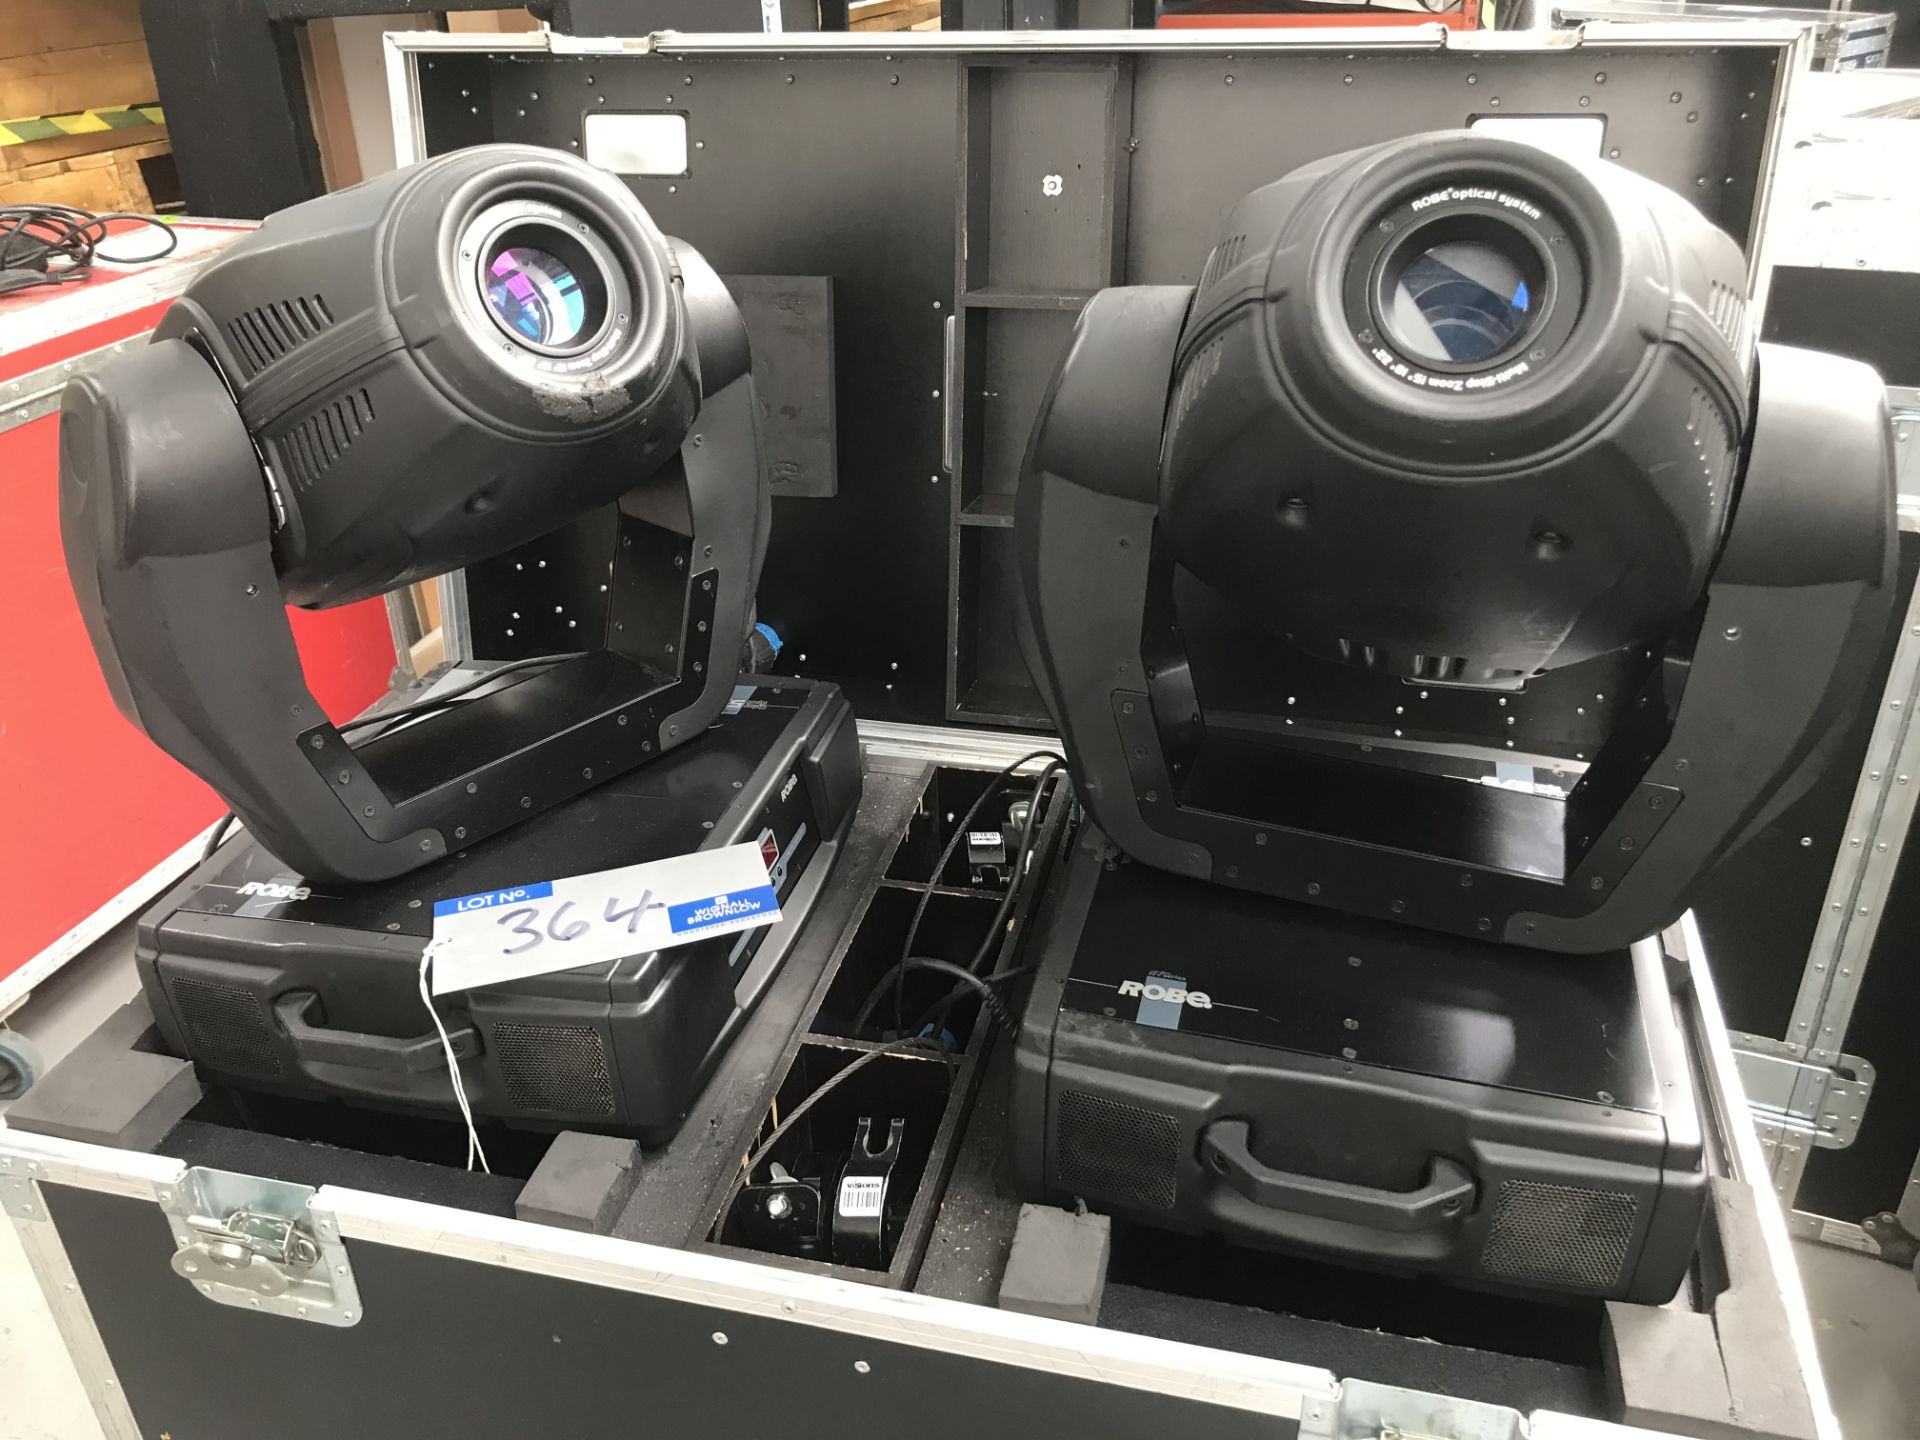 2 Robe AT Series Color Spot 575AT Moving Head Spotlights (recently serviced) with Clamps and